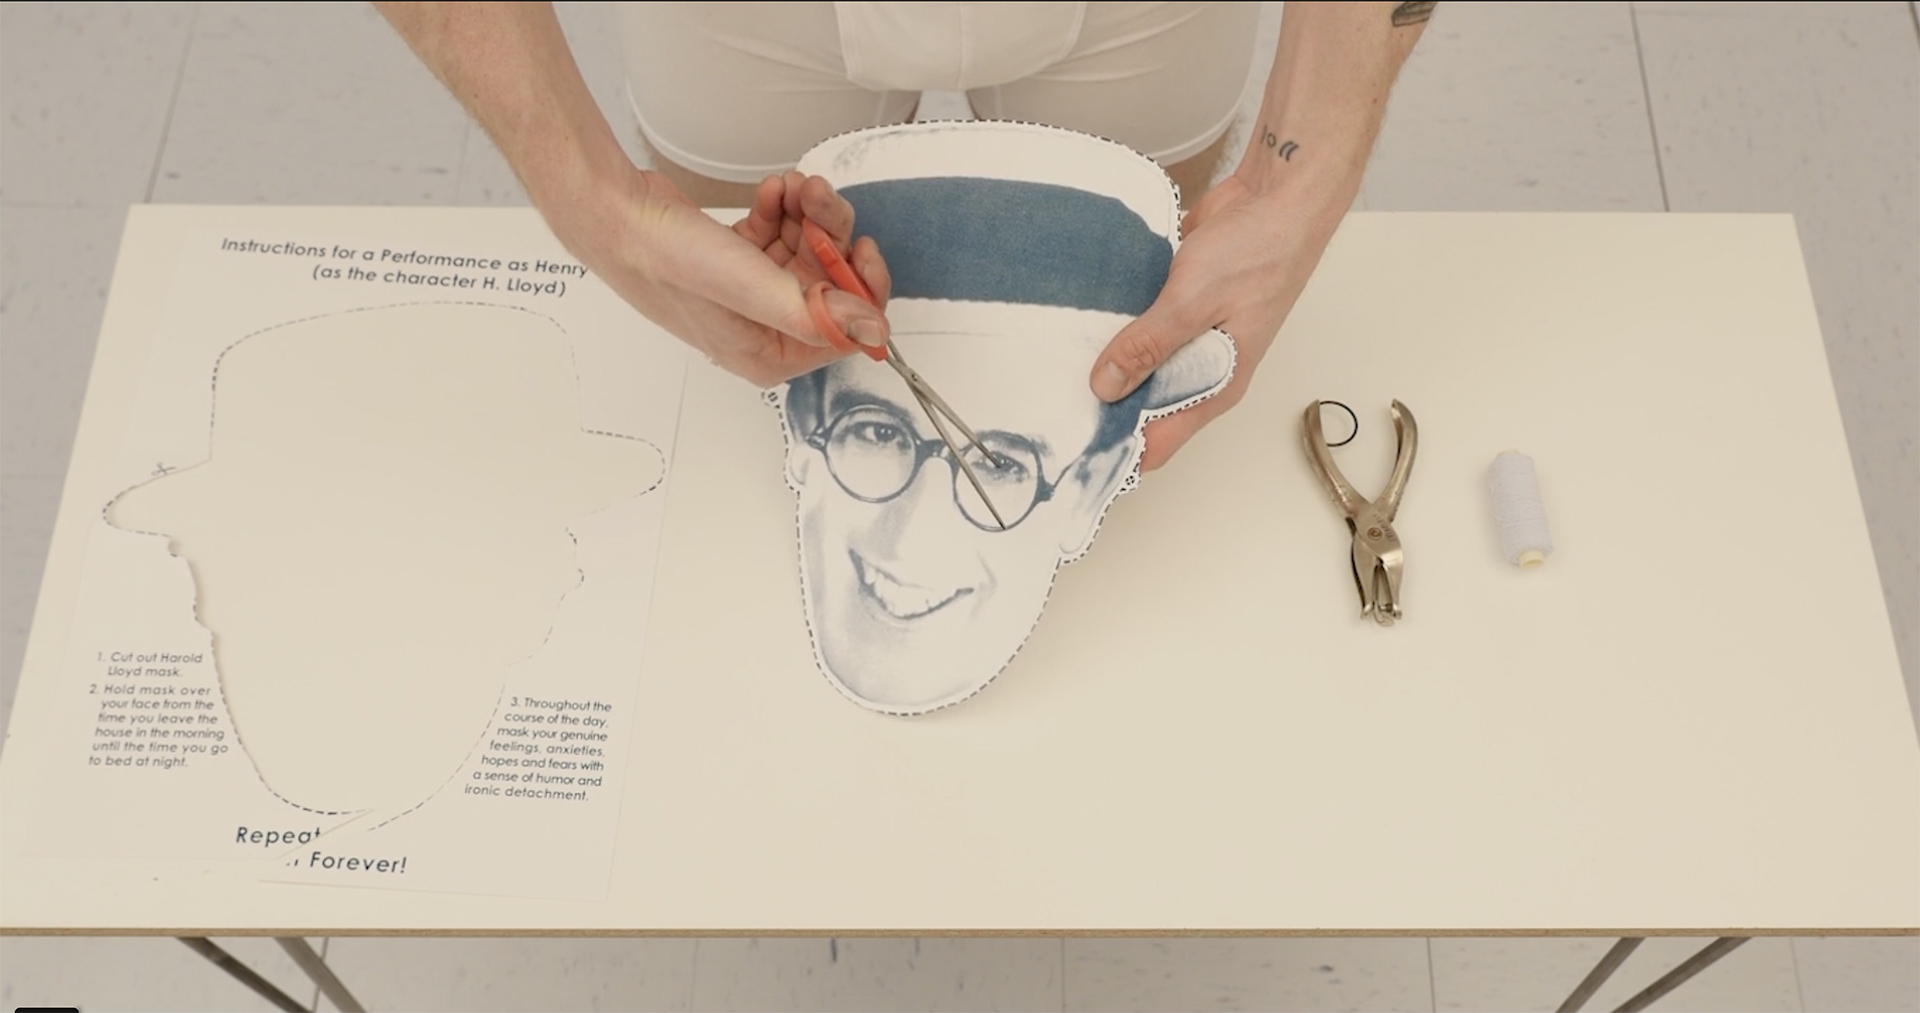 Screenprint of the silent film actor Harold Lloyd cut out by the artist as a performance